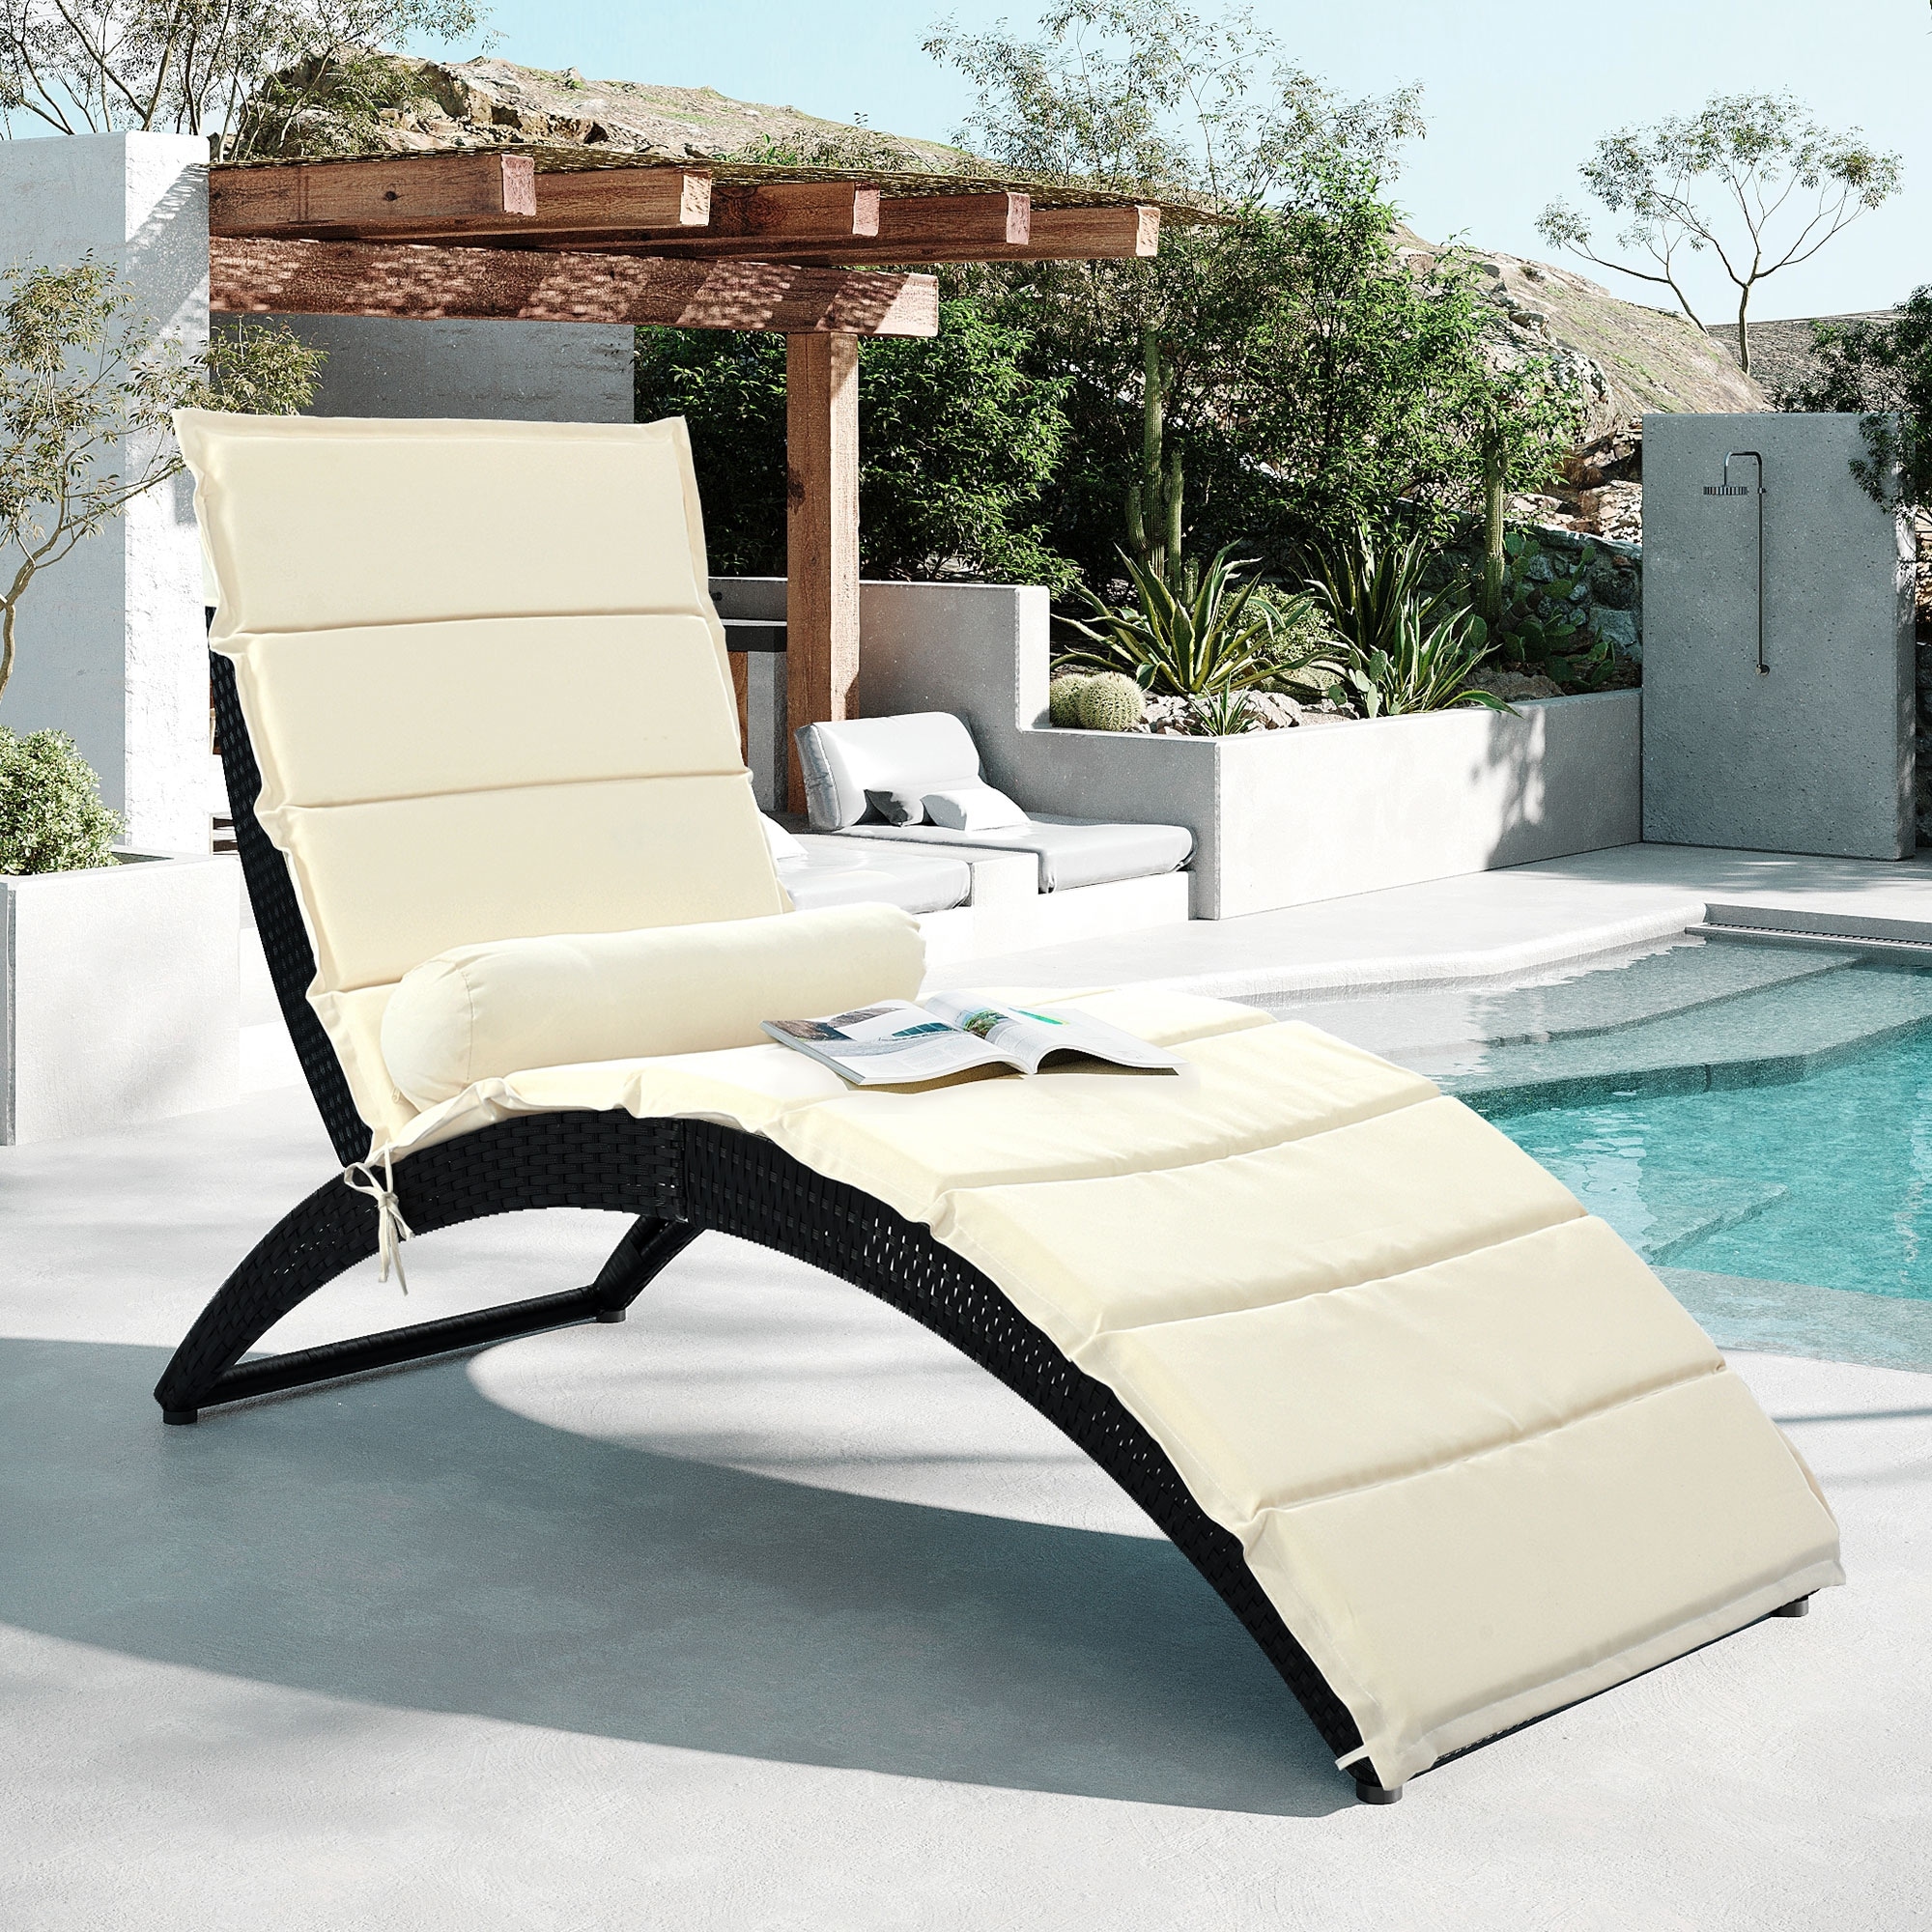 3 Piece Patio Sun Lounger Pe Rattan Foldable Chaise Lounger With Removablesoft Polyester Cushio and Long Pillow Amd Steel Frame